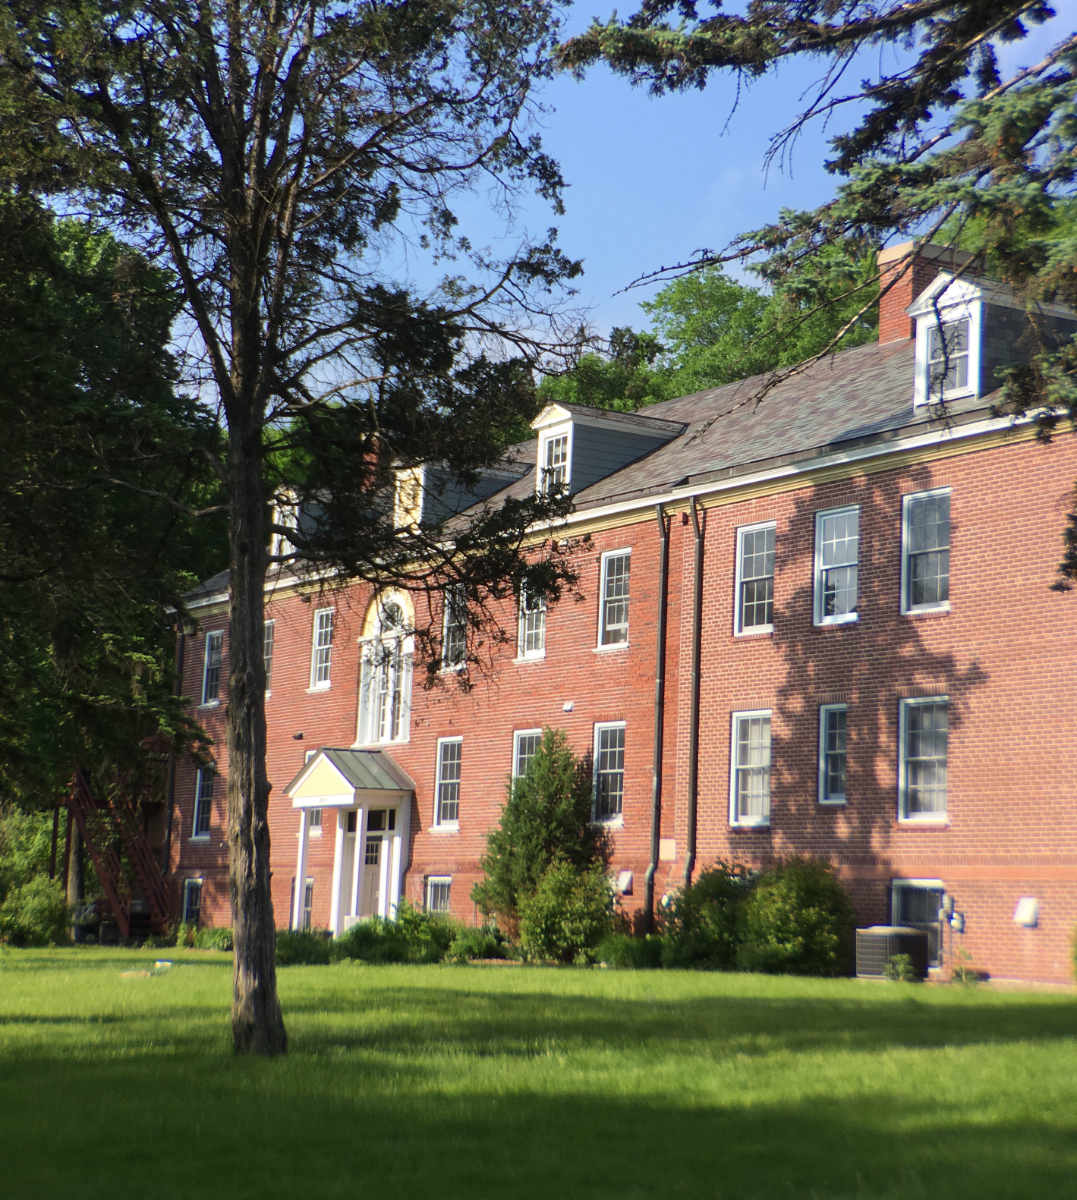 large two-sorty red brick building with dormers on the roof with a sunny lawn and trees